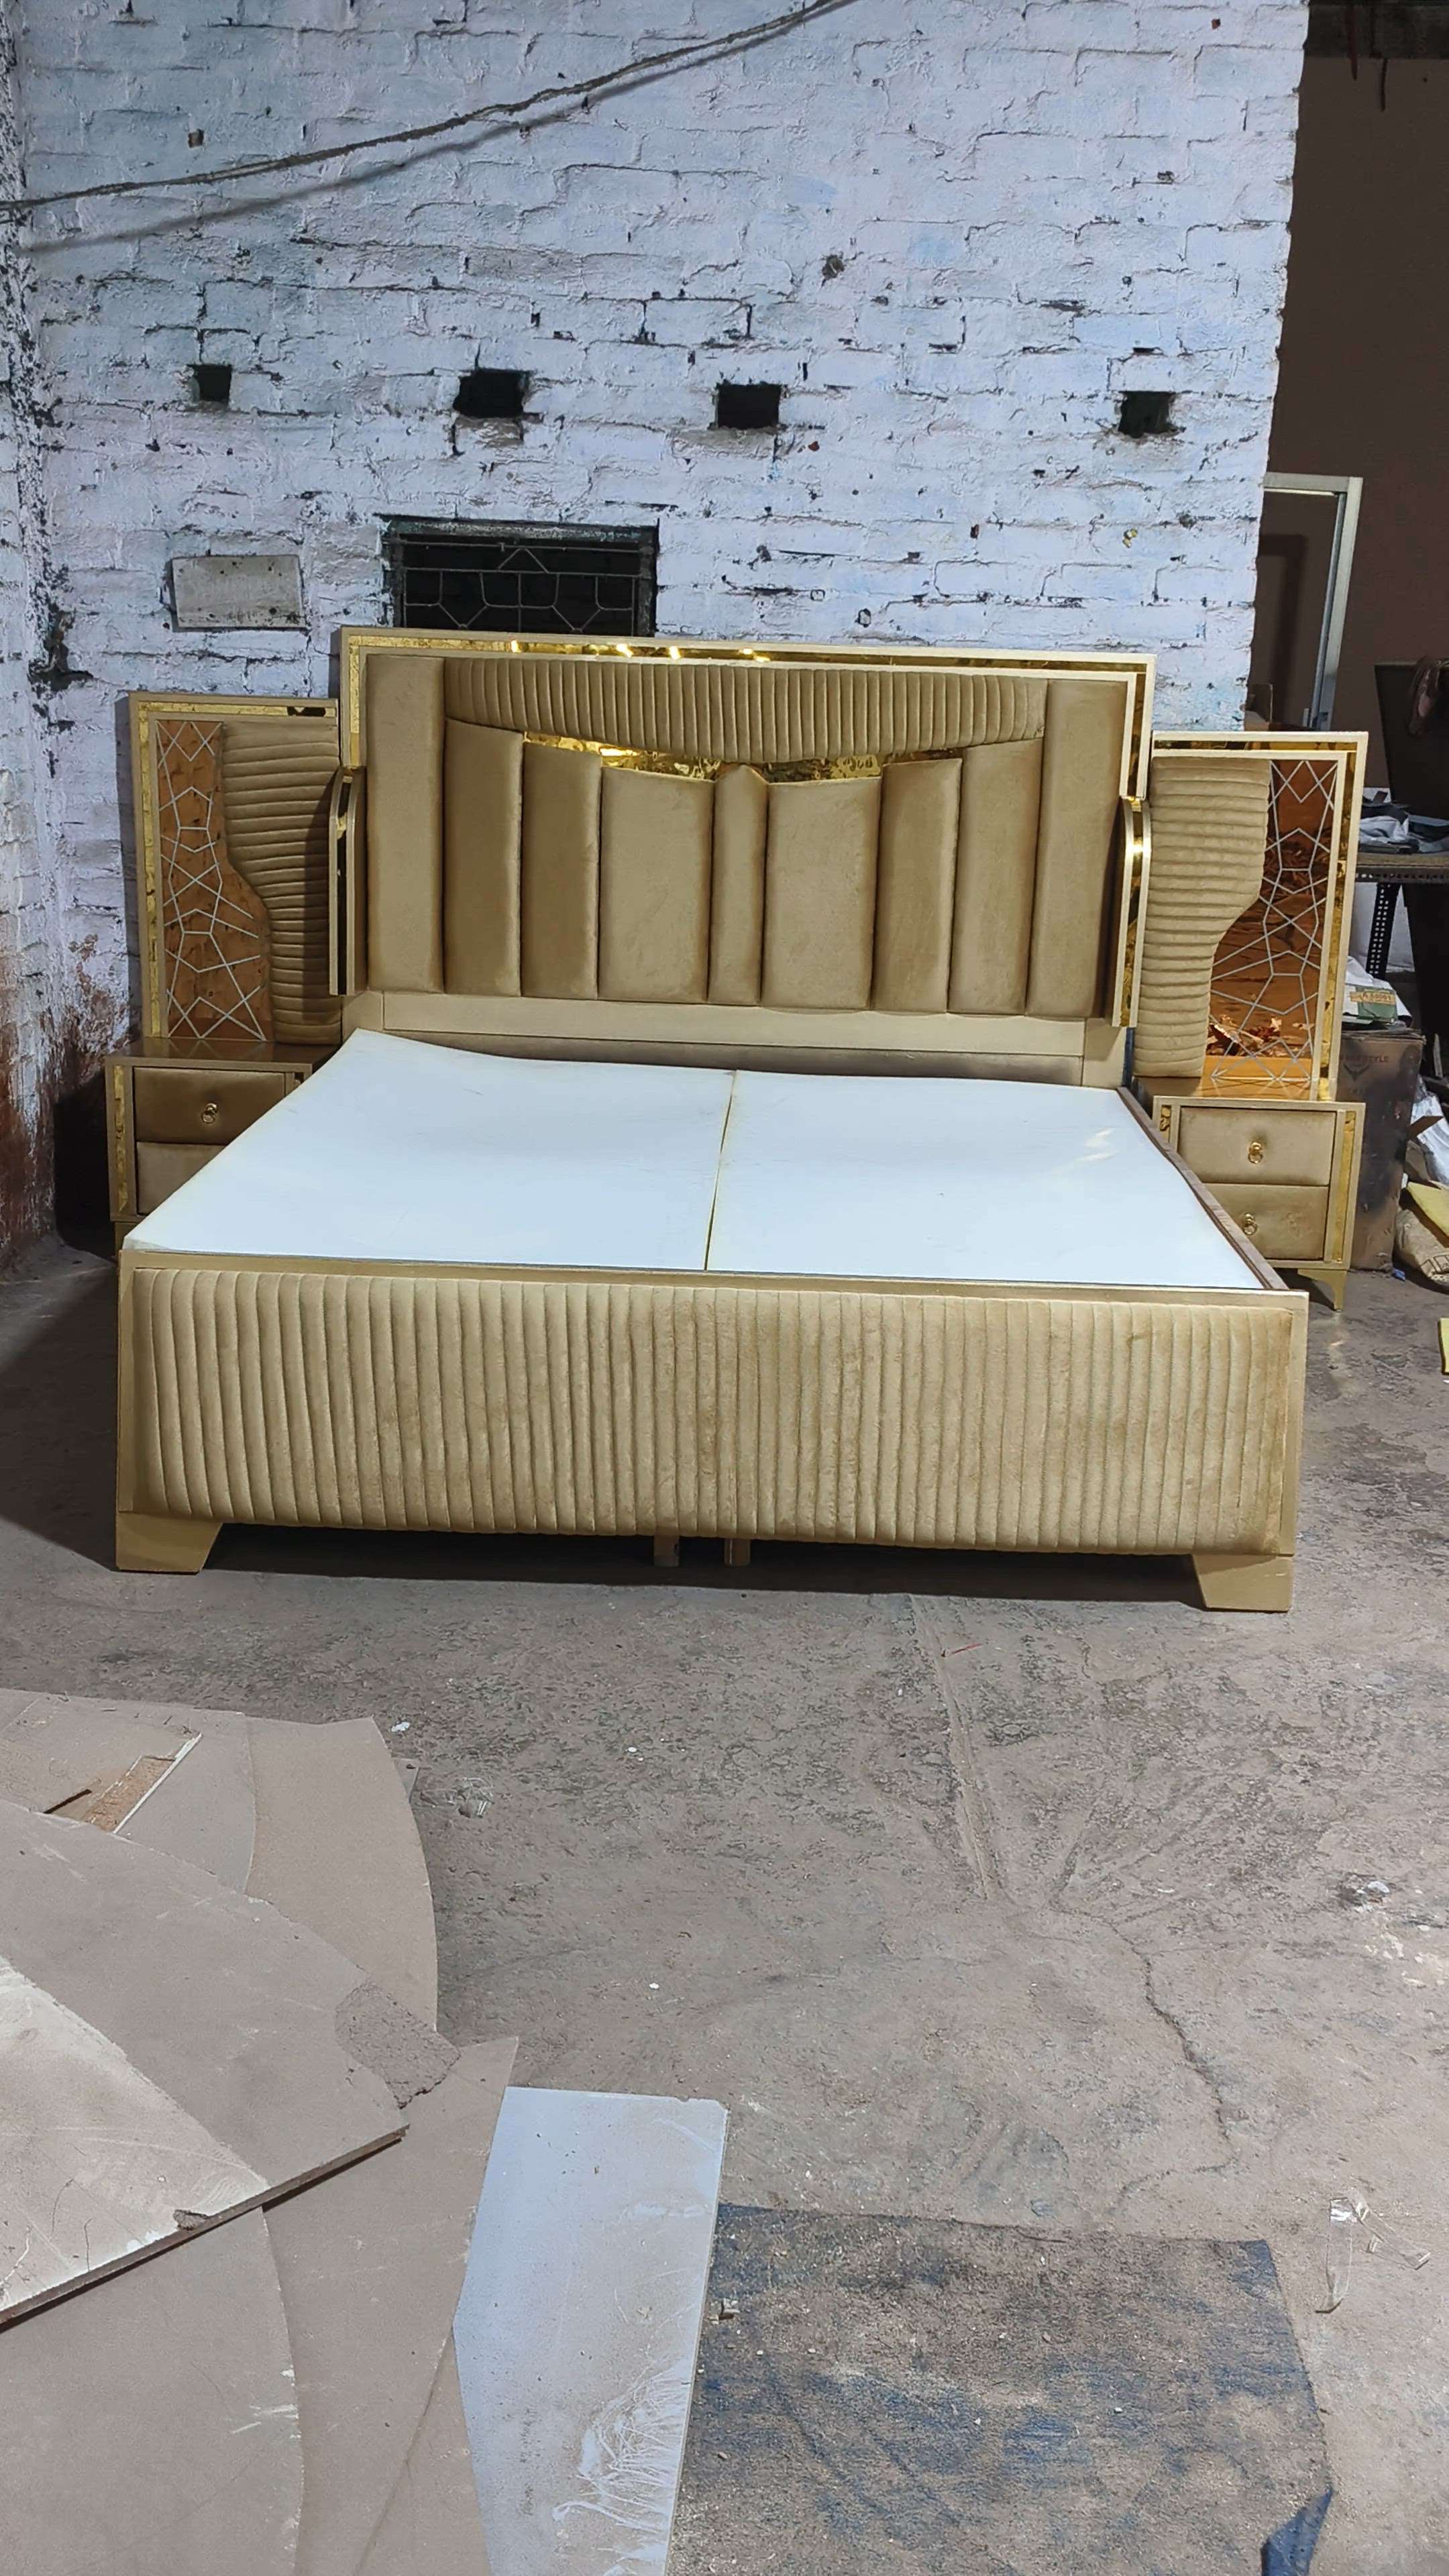 Luxury King Size Bed With Golden Touch  #bed  #furniture  #viral  #followme🙏🙏  #Shorts  #short  #bedroom  #design  #home  #sofa  #sofabed  #table  #interior  #LUXURY_BED